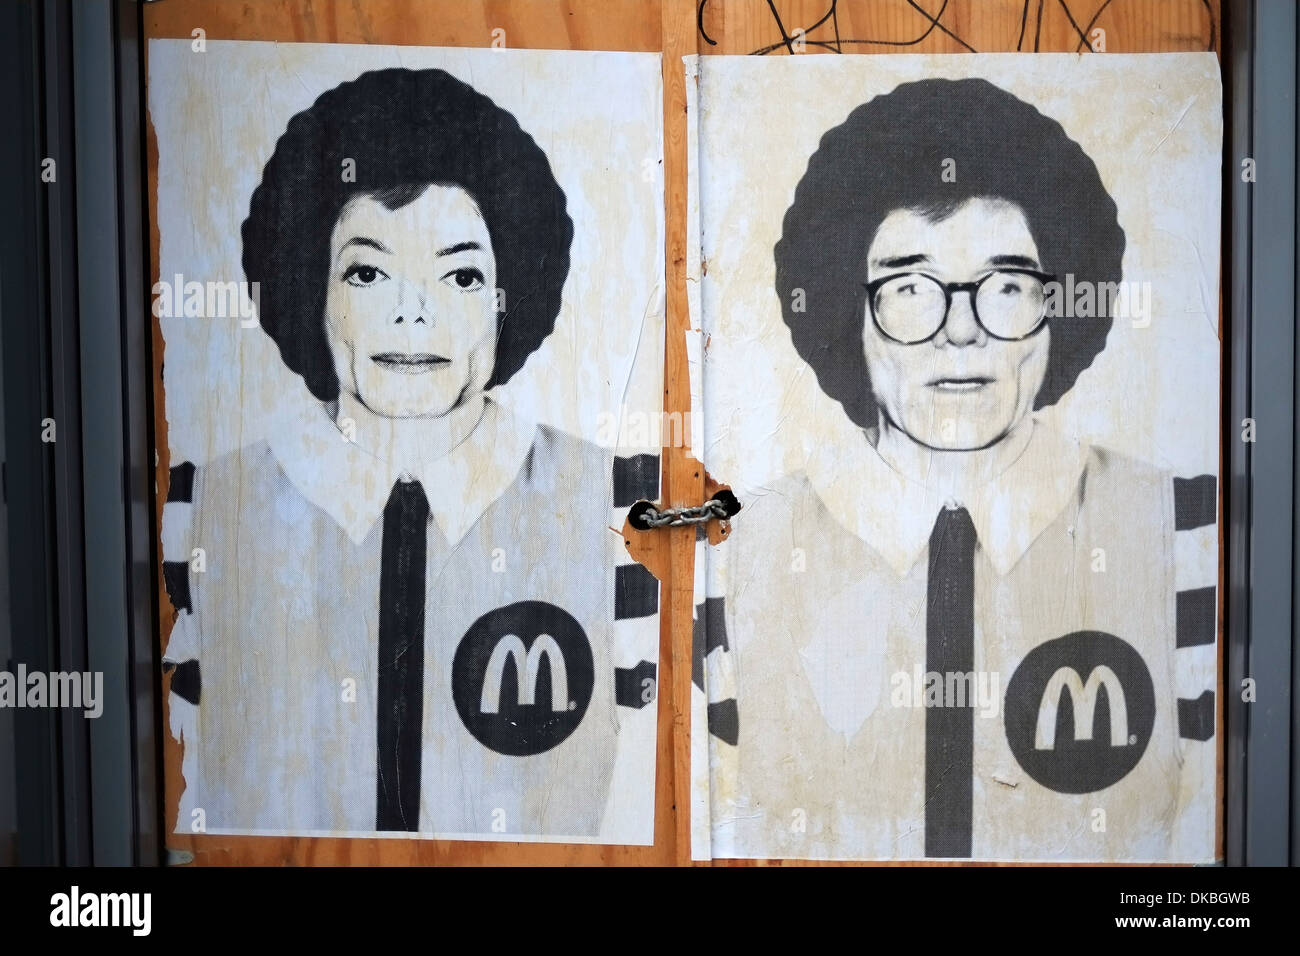 Street art posters despiting Michael Jackson and Andy Warhol as Ronald McDonald on the side of a building in Manhattan, NYC. Stock Photo